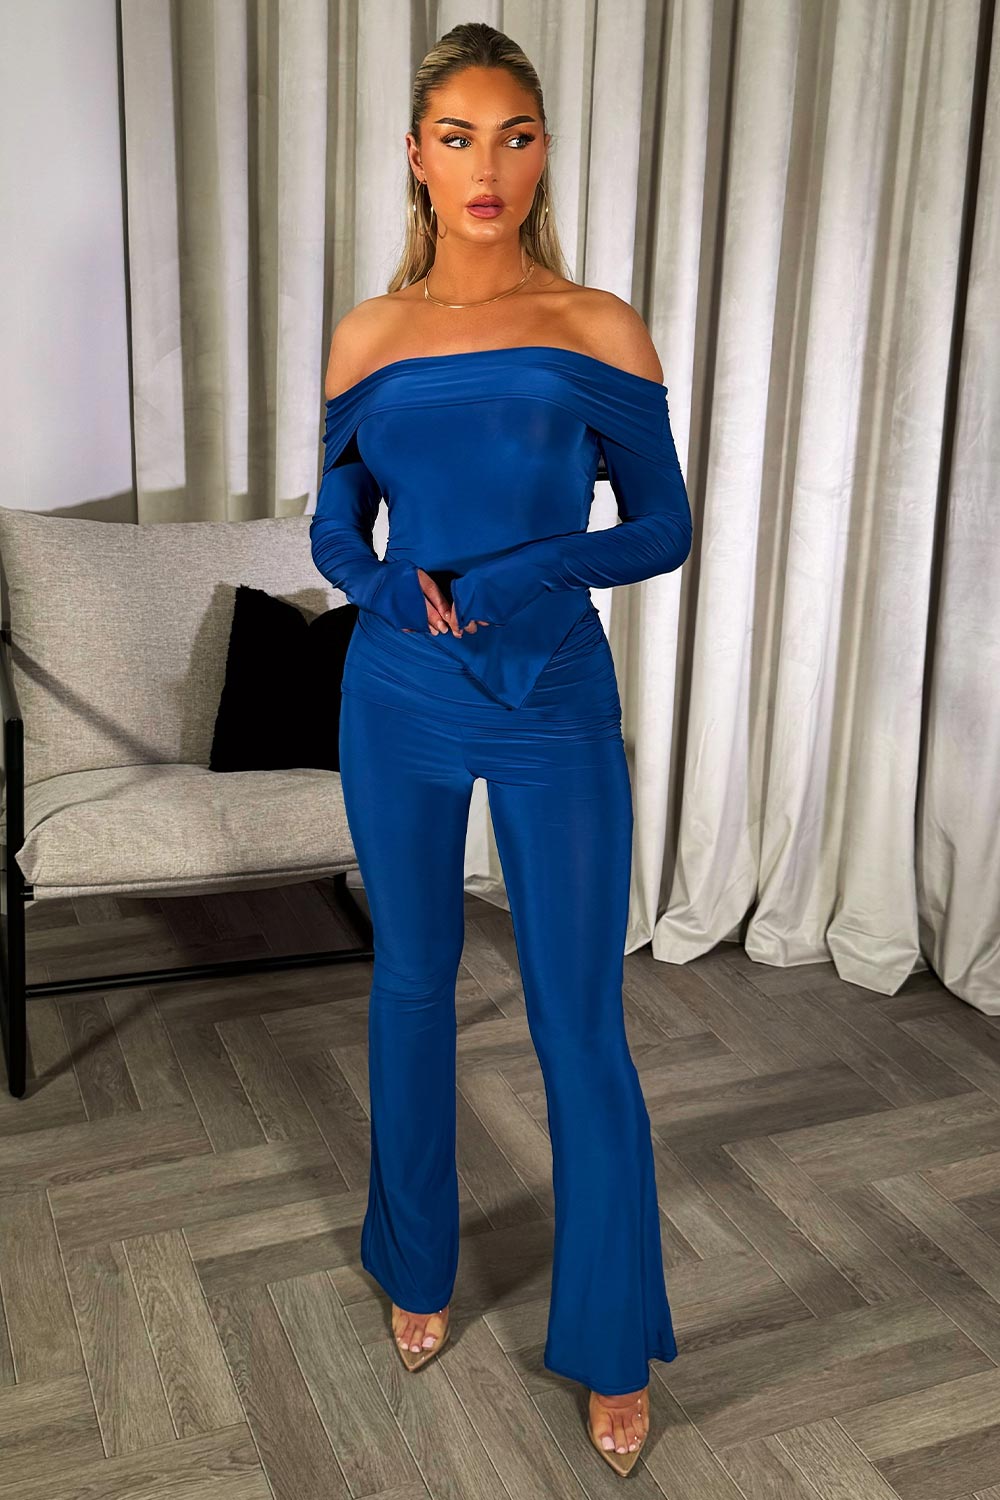 fold detail skinny flare trousers and off shoulder long sleeve top co ord set royal blue going out outfit